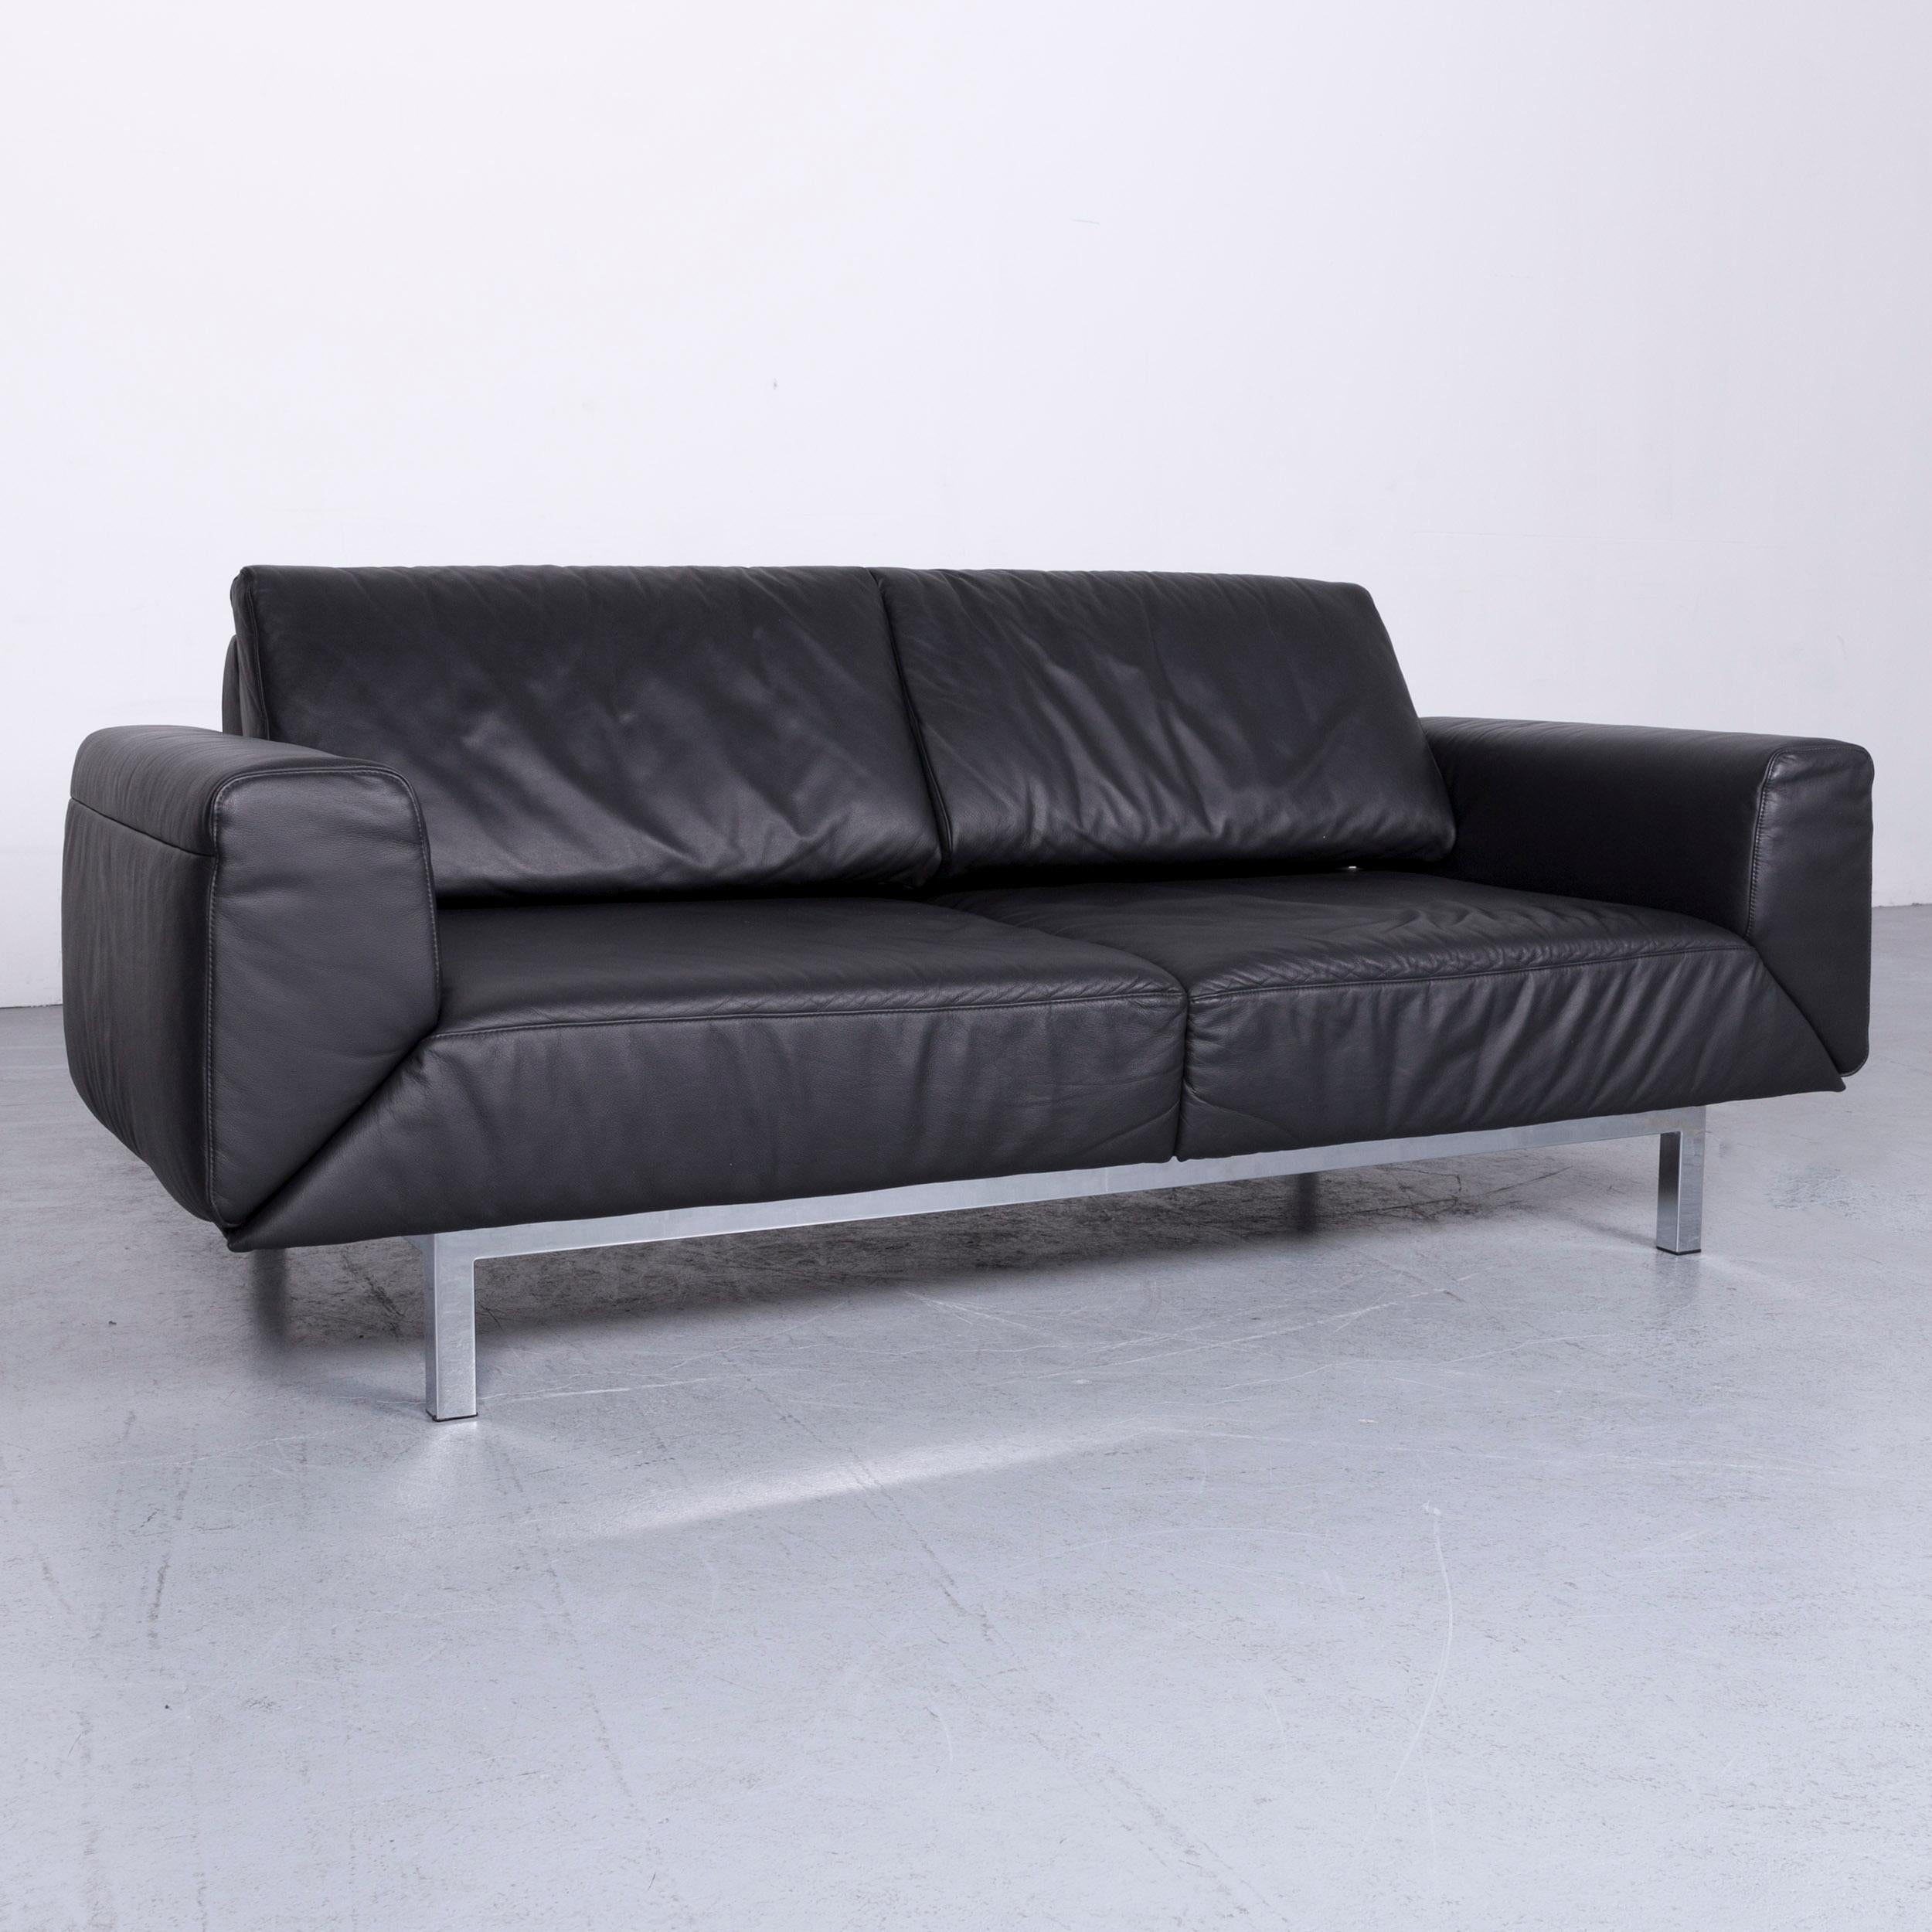 We bring to you an Mondo Relaxa designer three-seat sofa leather black function couch.